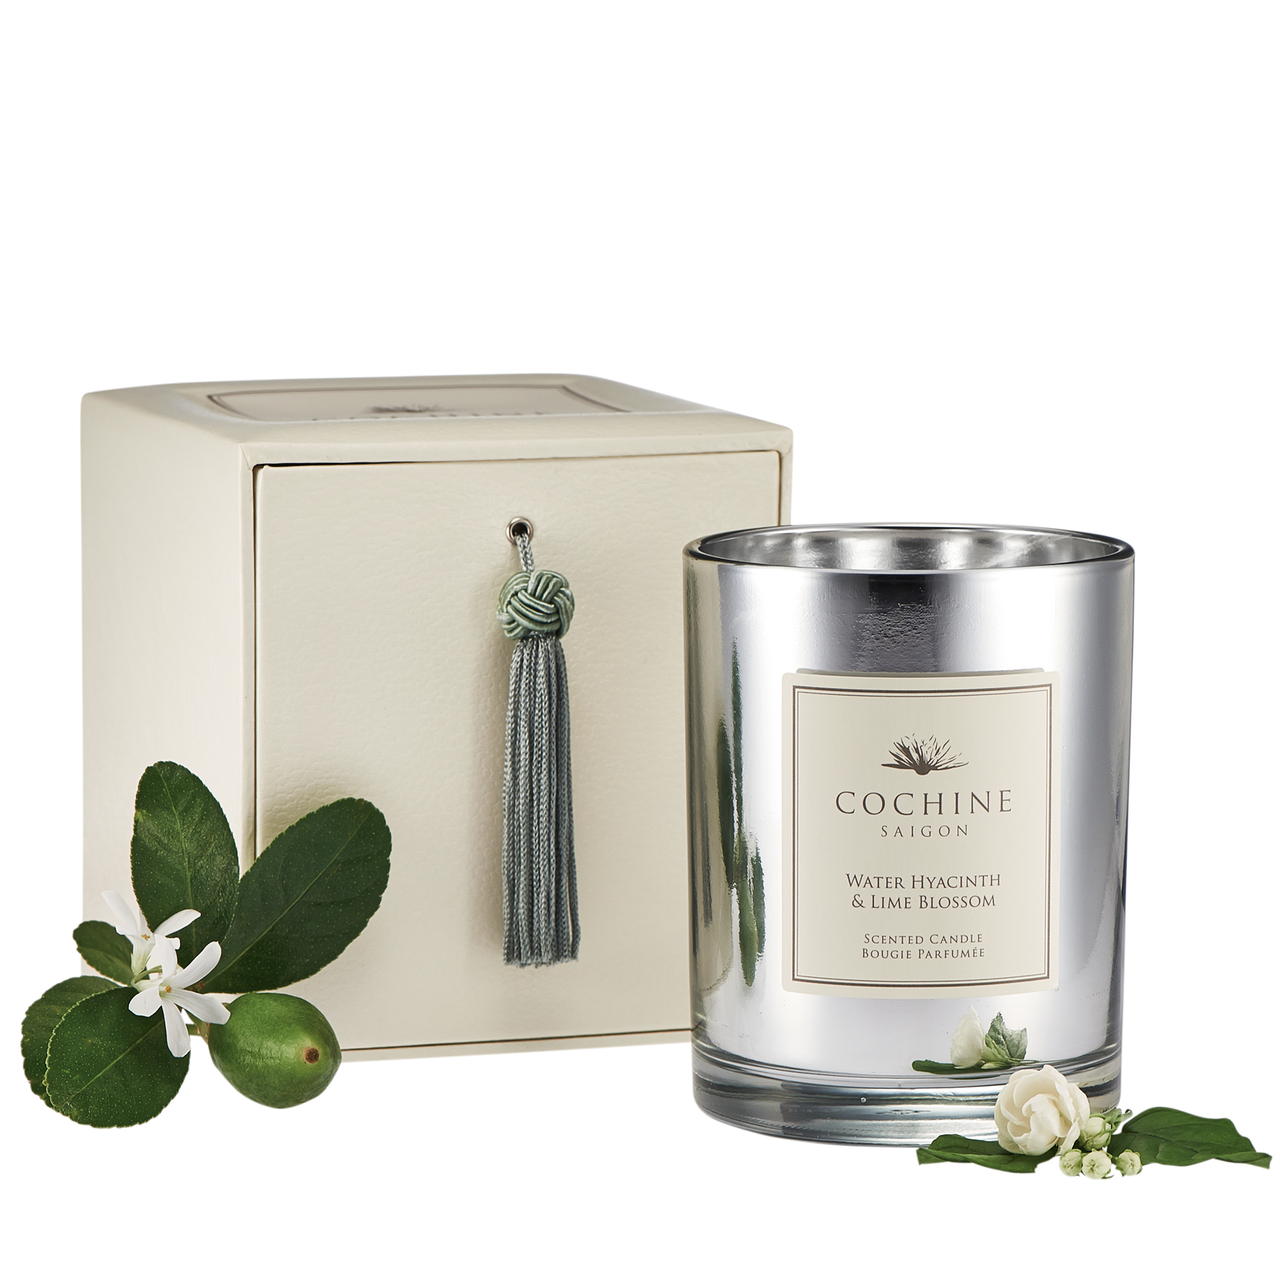 The fresh scent of Lime Blossom is combined with woody notes of Water Hyacinth to create this invigorating fragrance reminiscent of lazy afternoons on the banks of the Saigon river. Cochine candles are made using the finest essential oils, eco-friendly cotton wicks and the creamiest botanical wax from renewable resources.